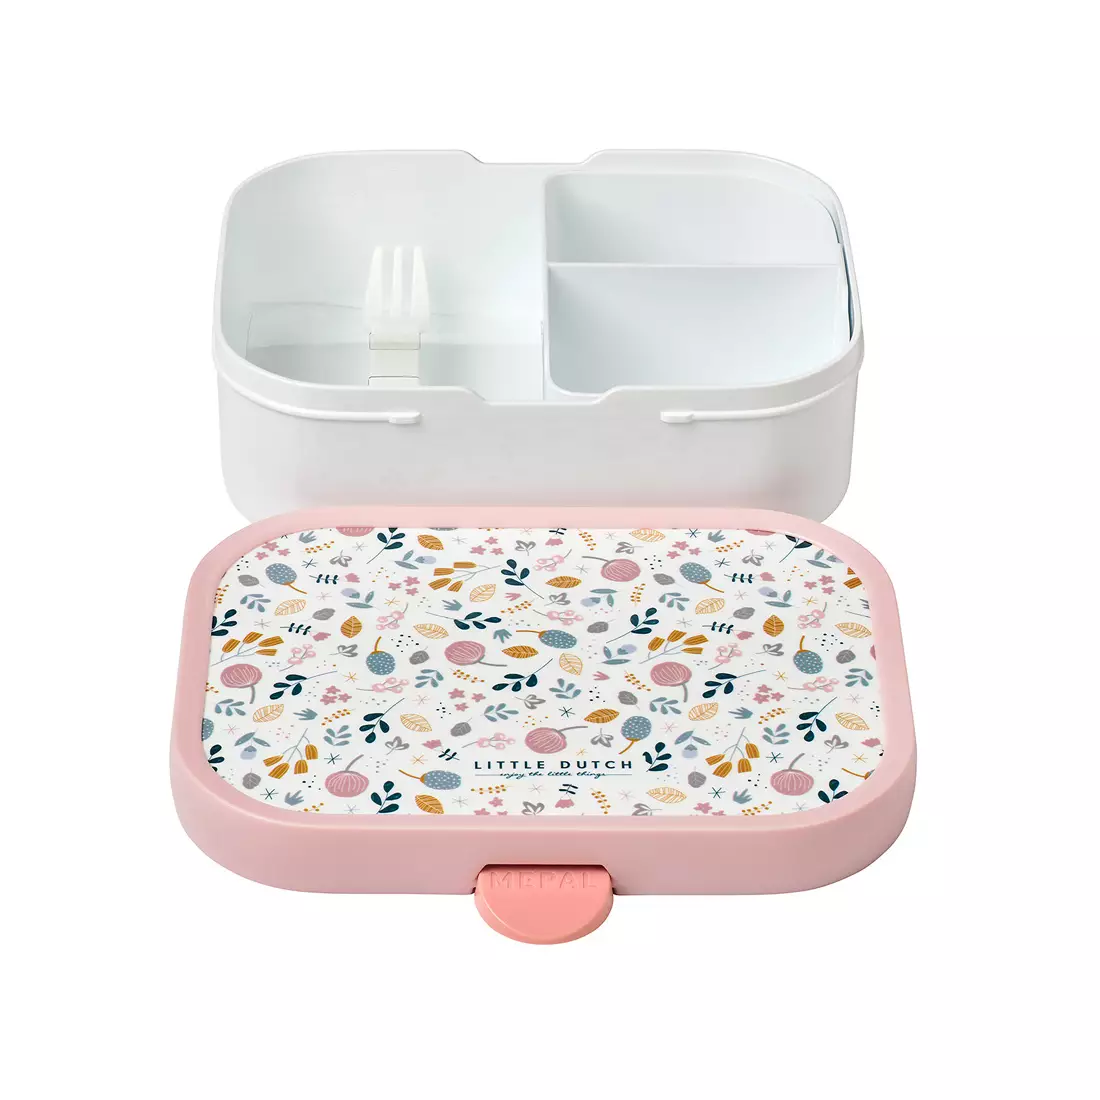 Mepal Campus Spring Flowers children's lunchbox, white in flowers